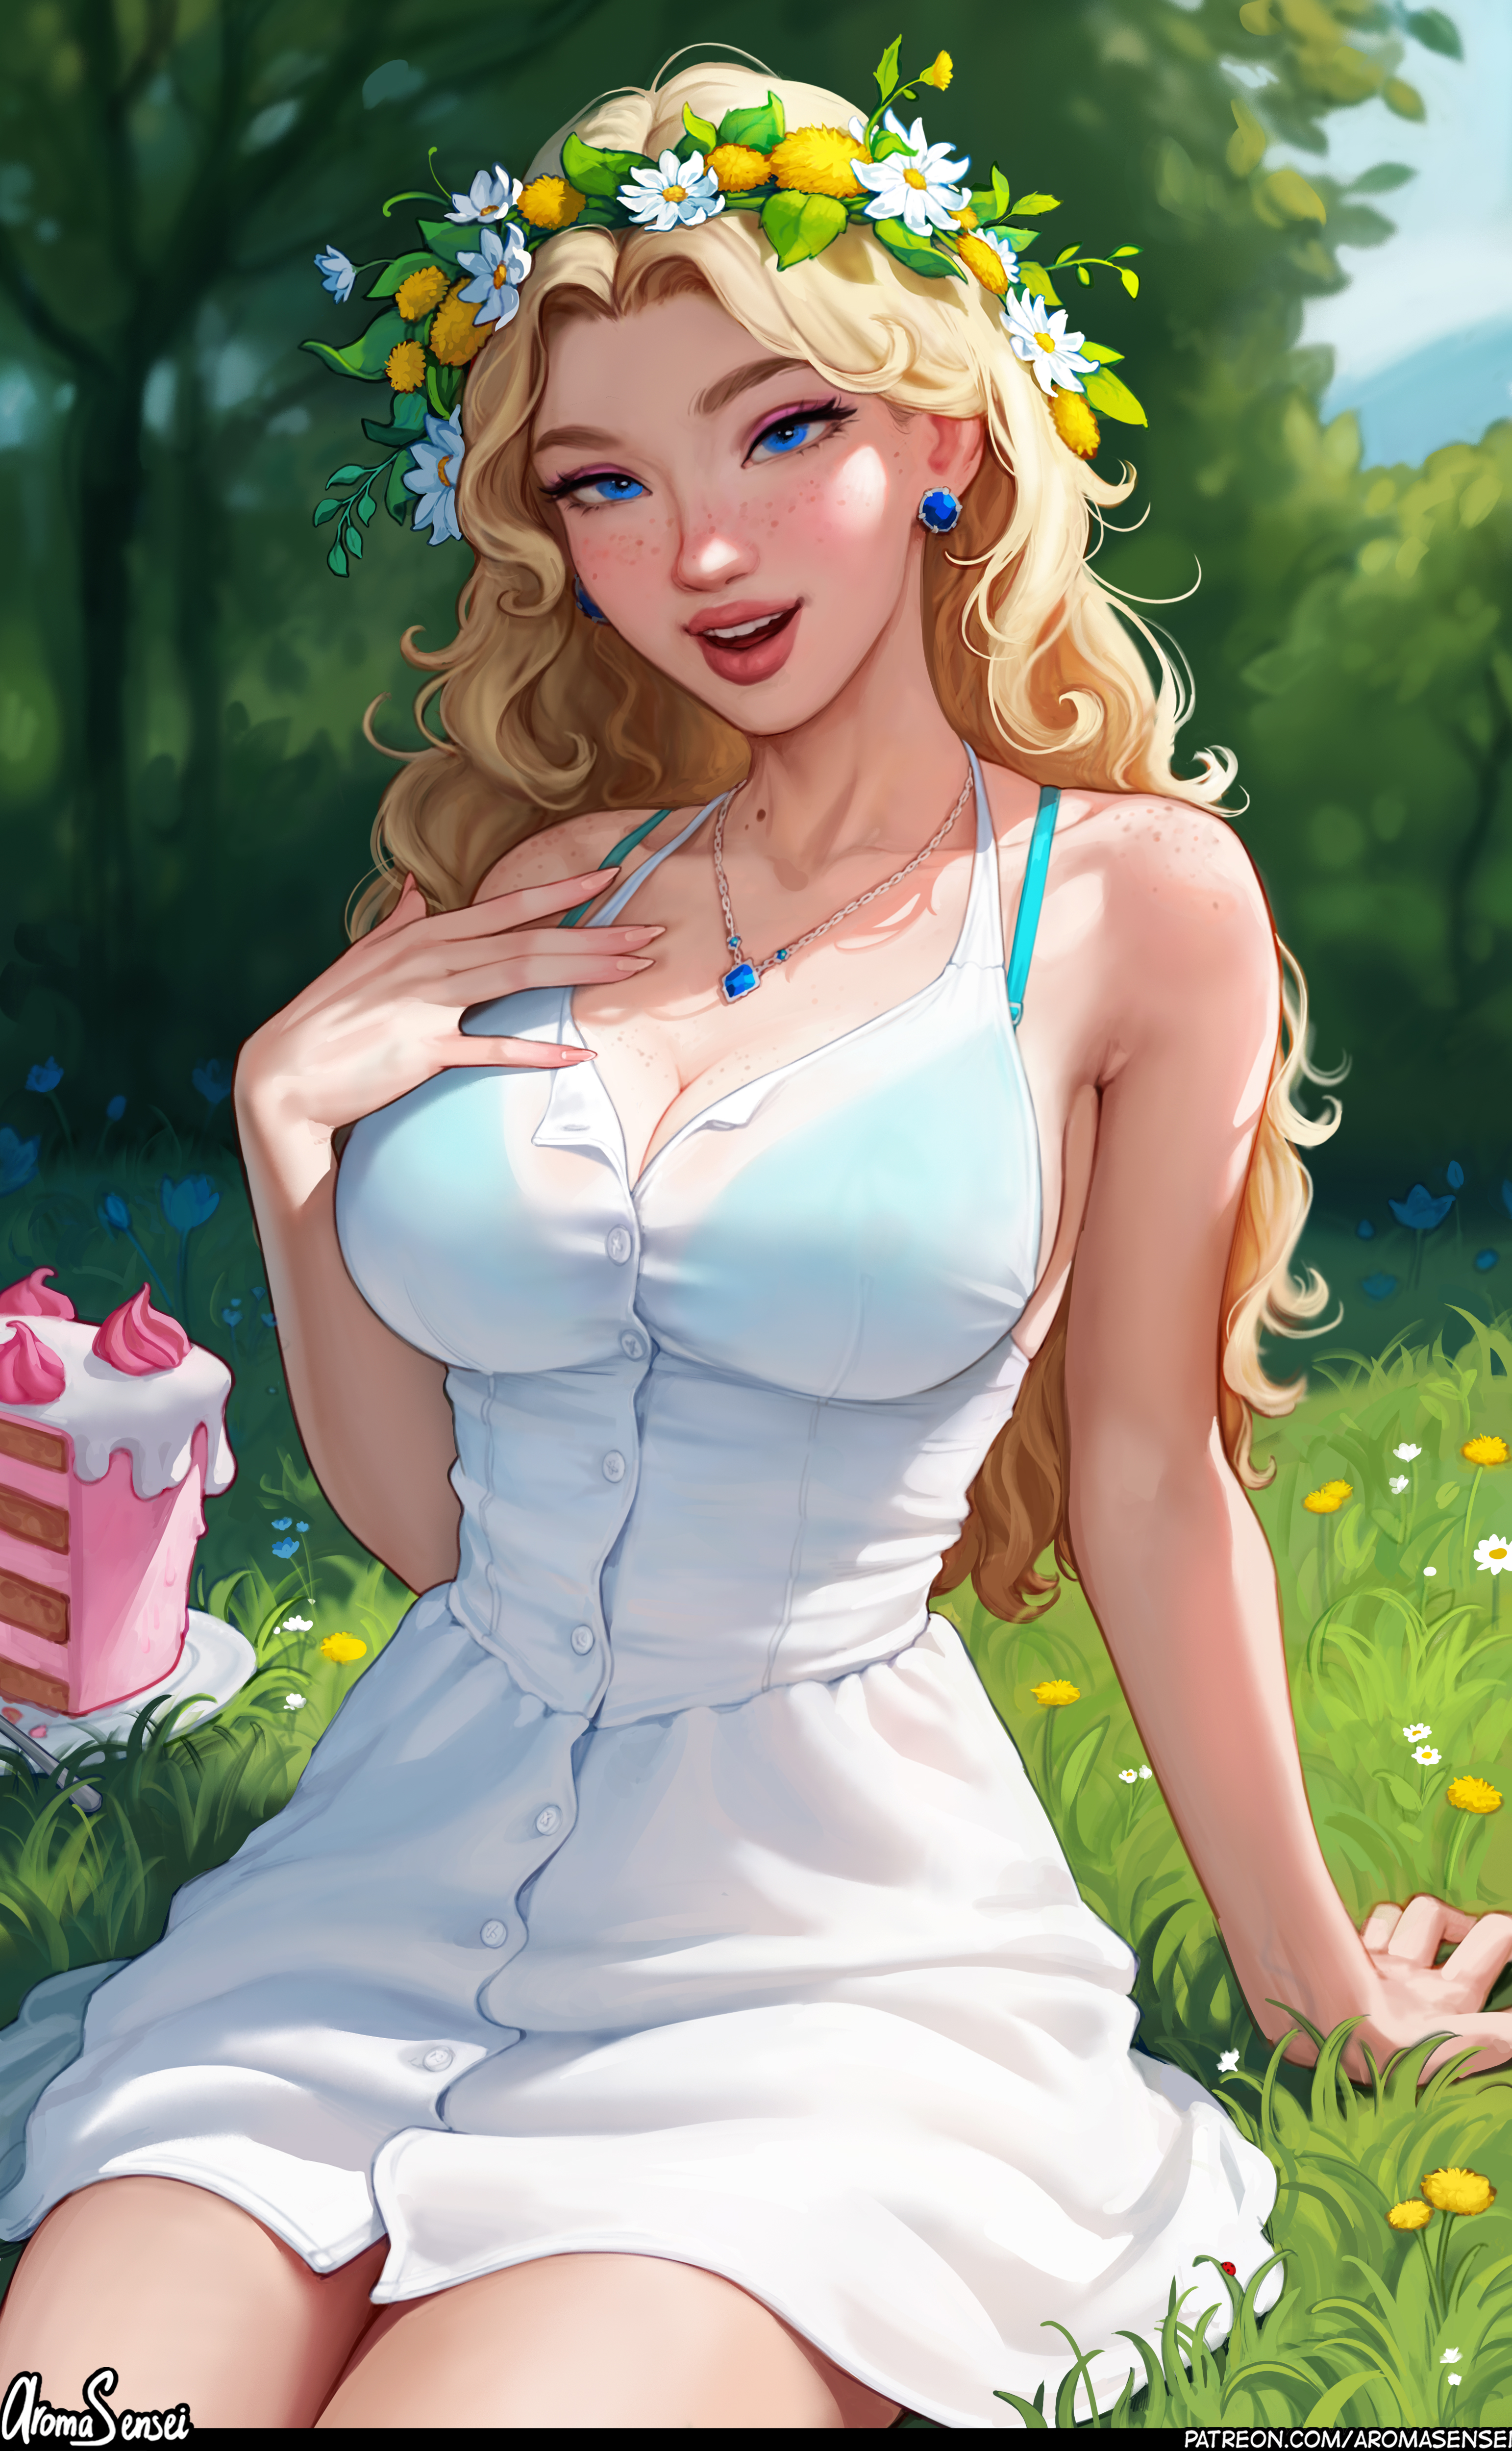 General 3085x5000 Haley (Stardew Valley) Stardew Valley video games video game girls video game characters artwork drawing fan art Aroma Sensei portrait display grass flower in hair necklace cake sweets smiling looking at viewer sunlight big boobs sitting long hair earring watermarked signature trees cleavage see-through clothing